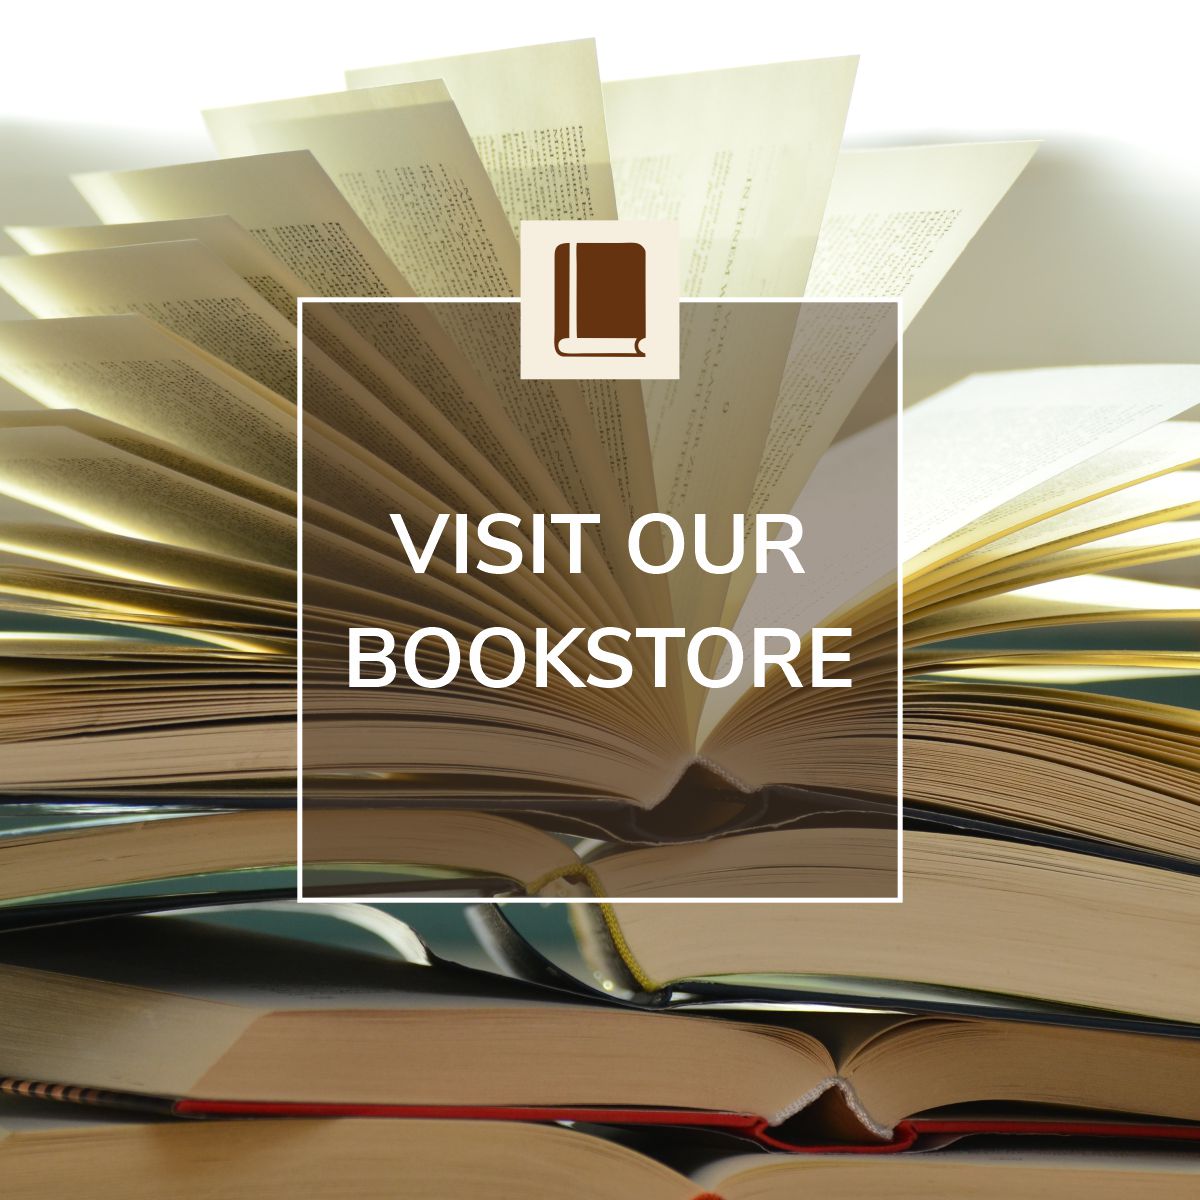 Visit Our Bookstore